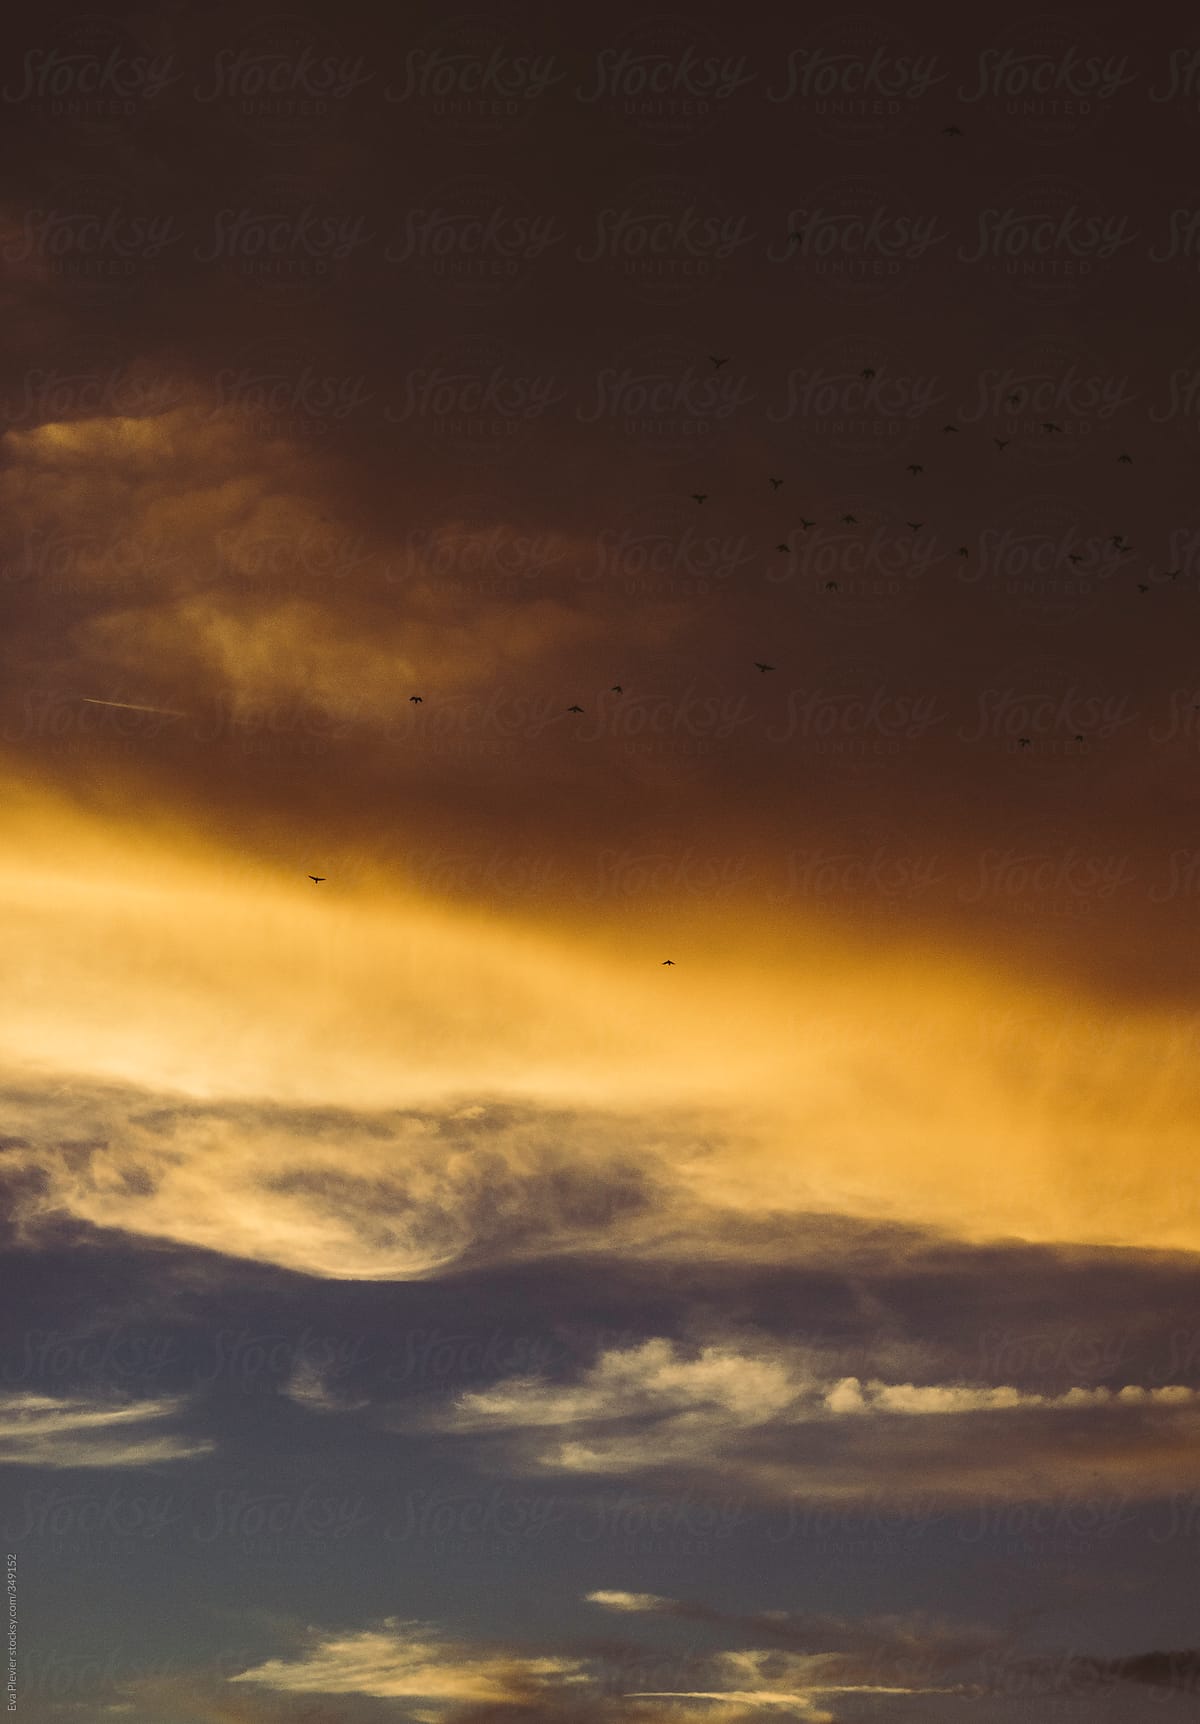 Birds flying by the clouds at sunset.